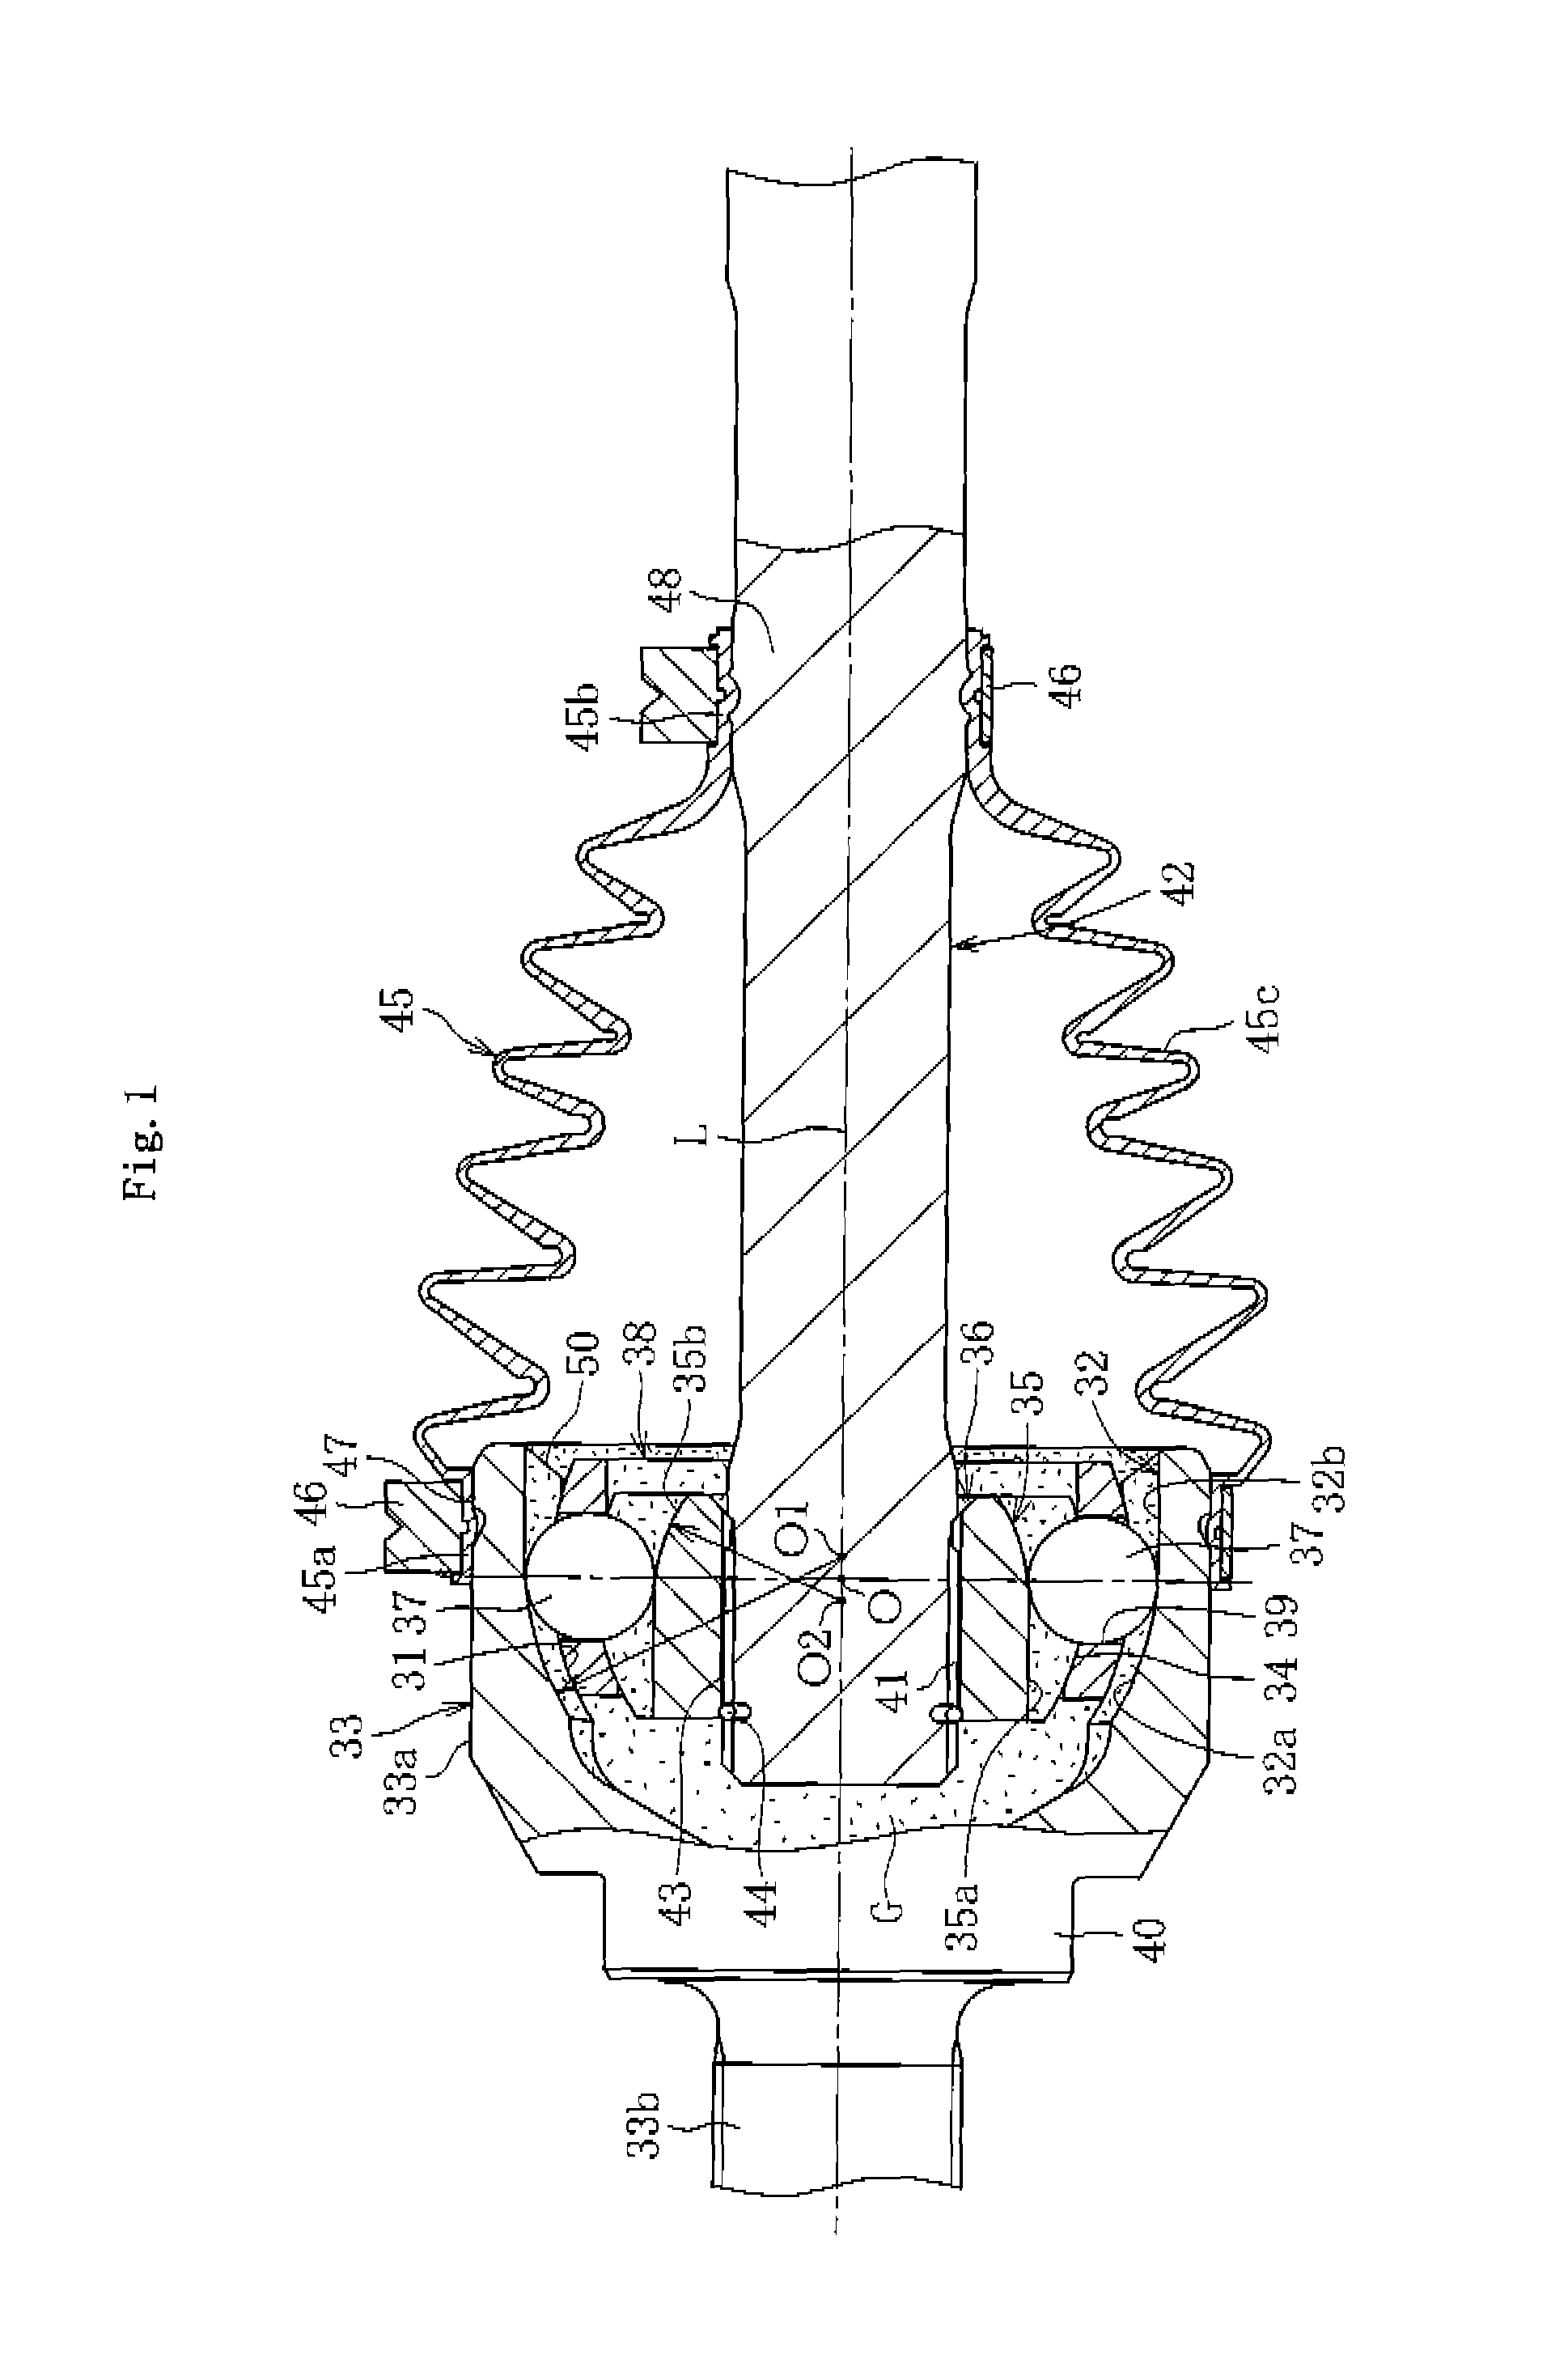 Fixed-type constant velocity universal joint